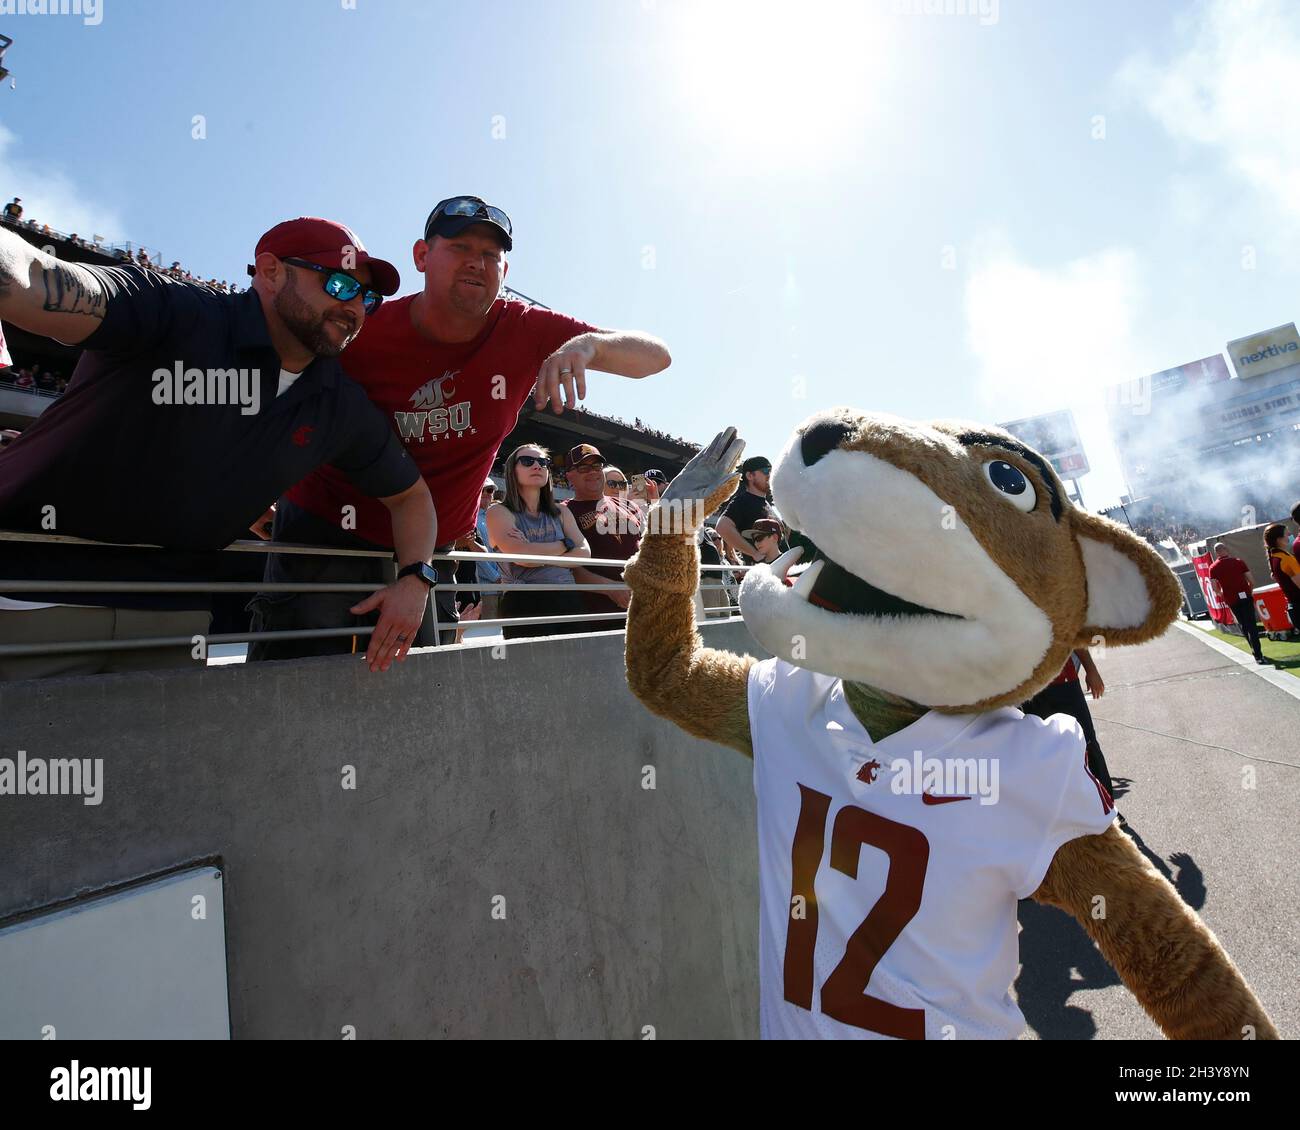 October 30, 2021: Washington State mascot interacts with fans before ...